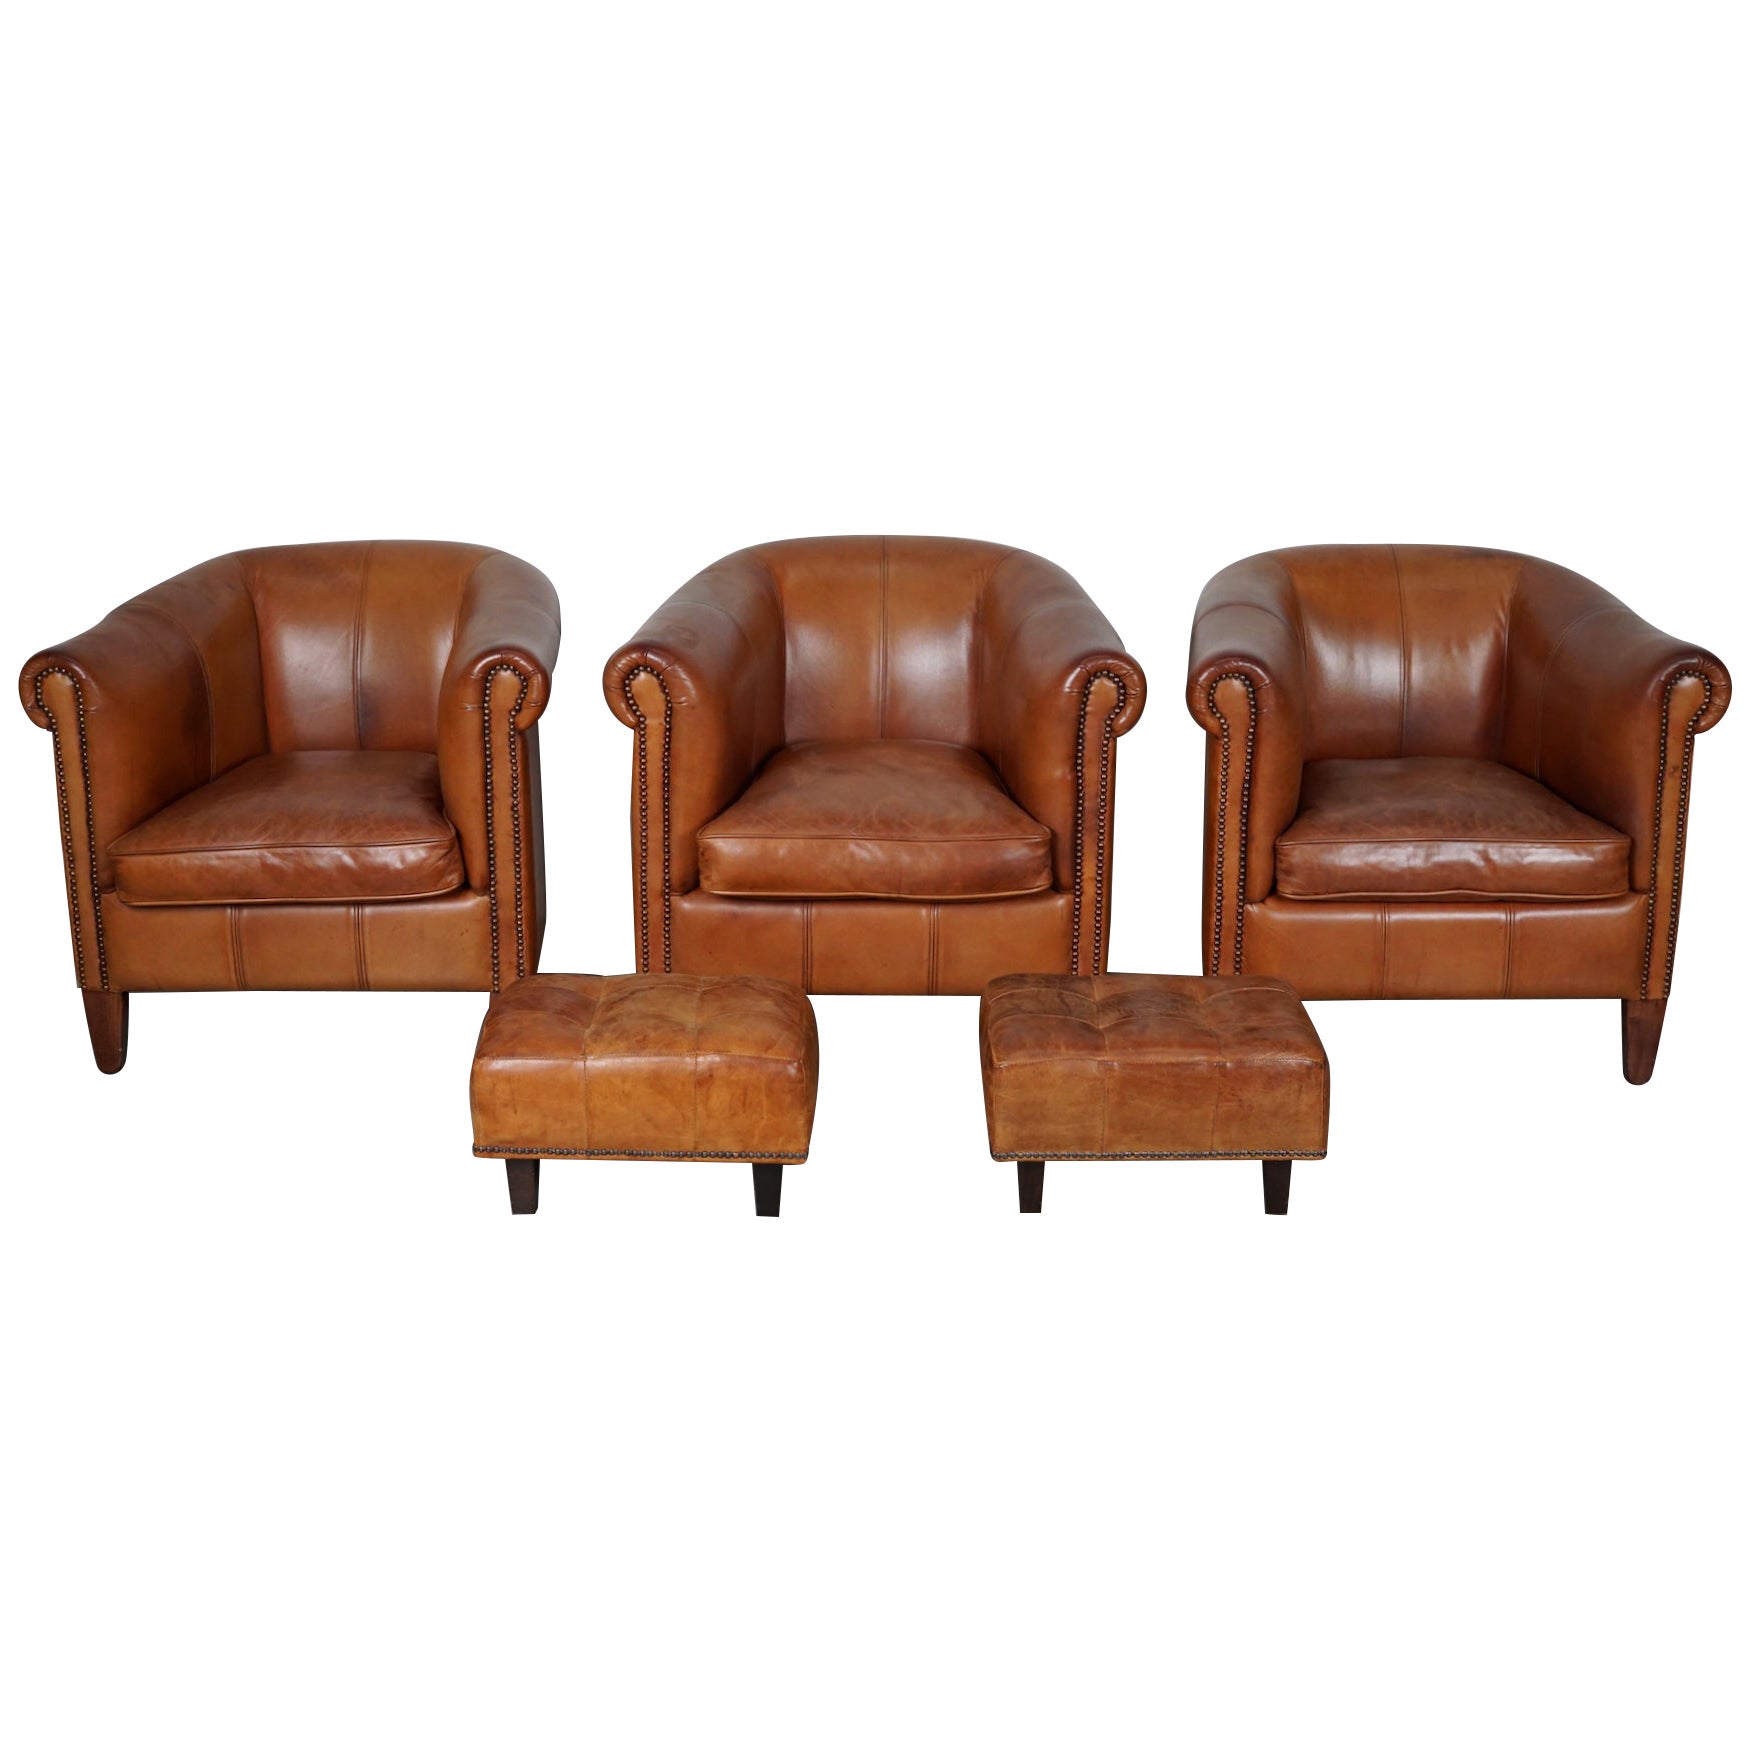  Vintage Dutch Cognac Leather Club Chairs, Set of Three with Two Footstools